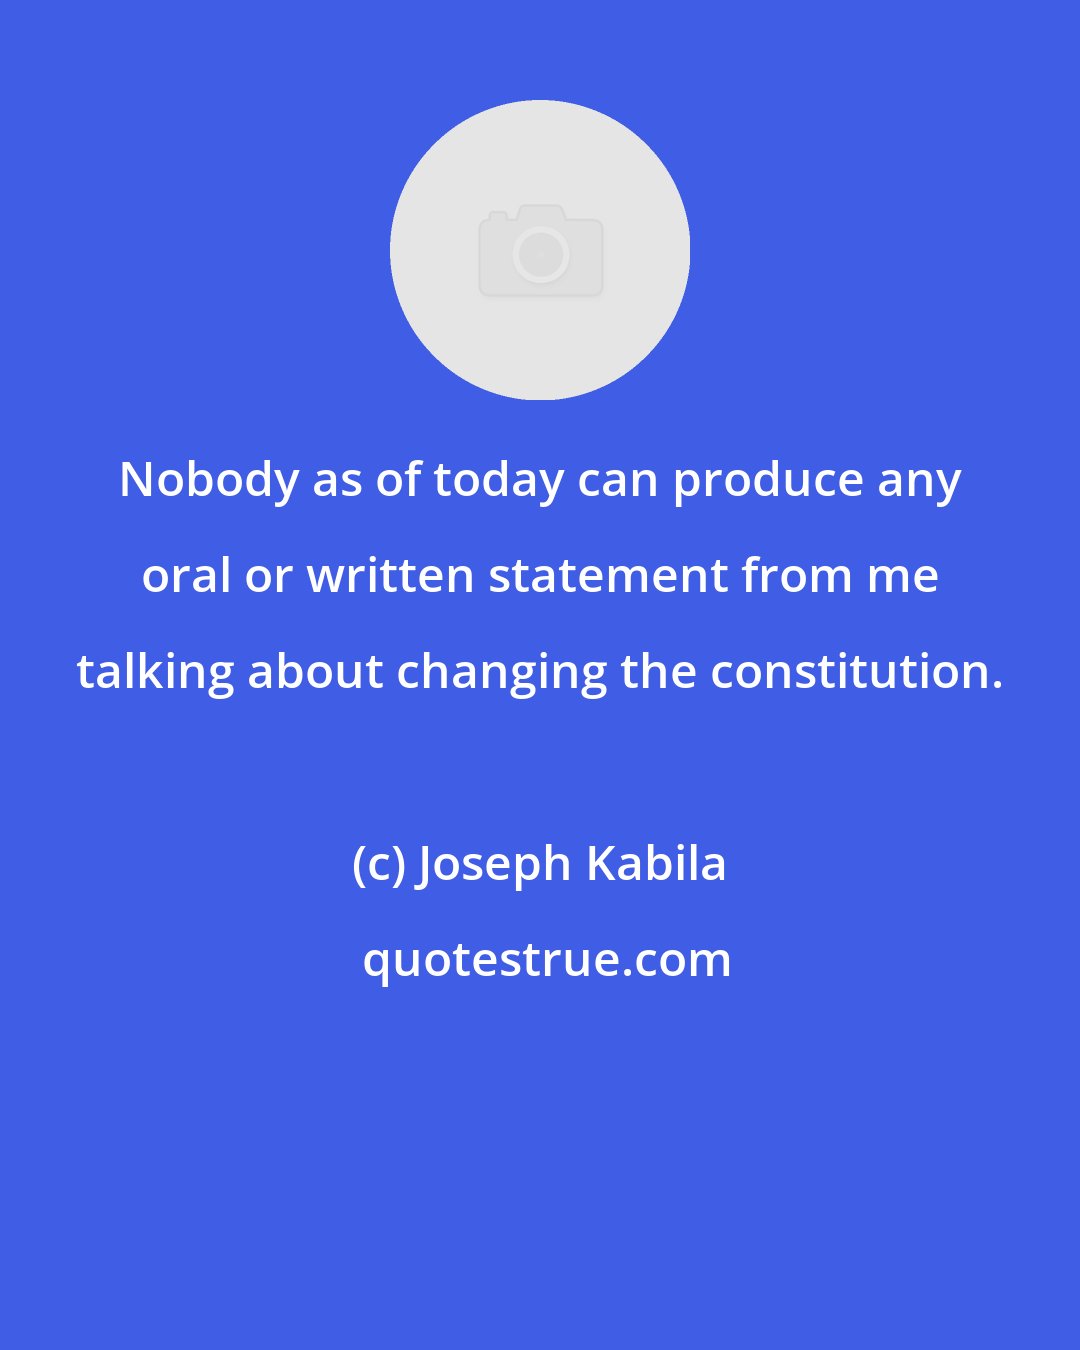 Joseph Kabila: Nobody as of today can produce any oral or written statement from me talking about changing the constitution.